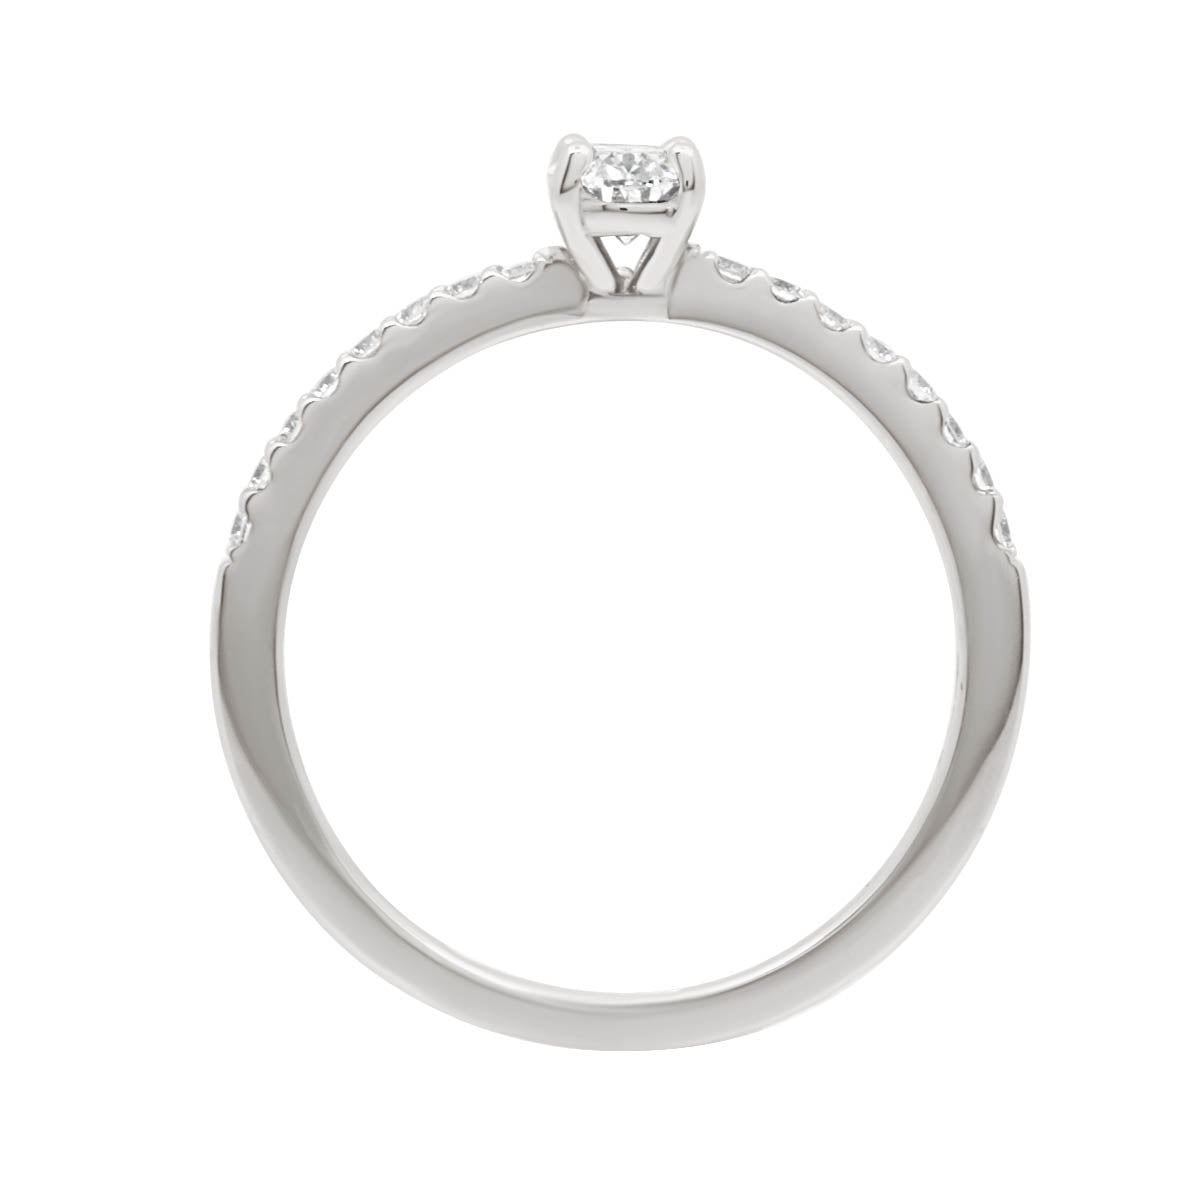 Oval with Scallop Set Band in white gold standing verticaly